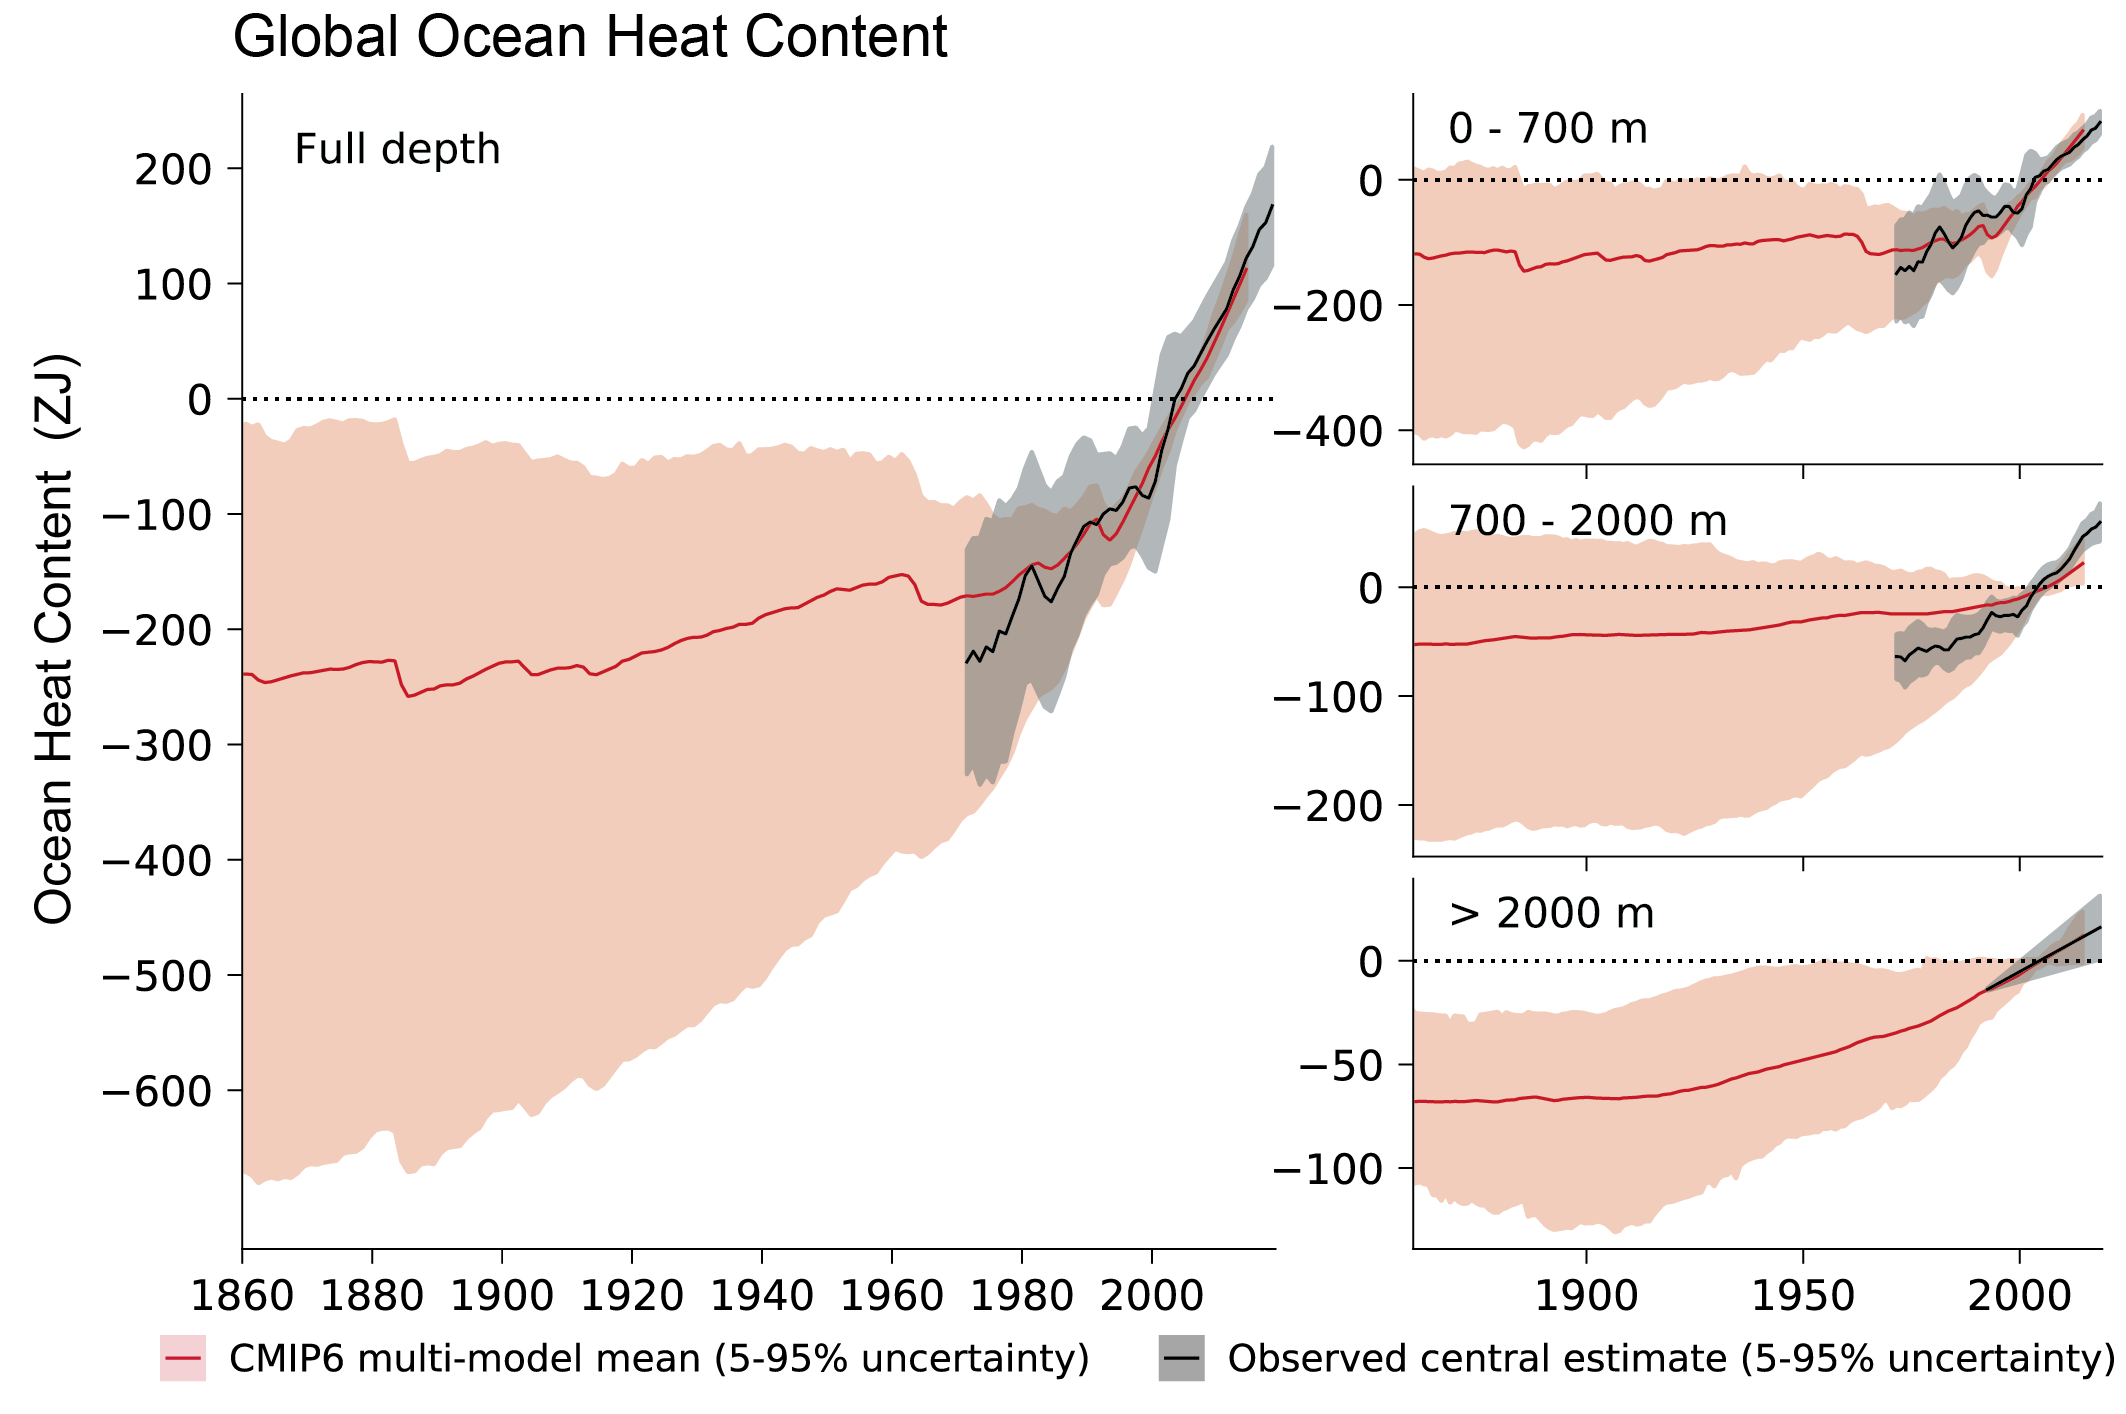 Timeseries of ocean heat content in models and observations from year 1860 to 2020.